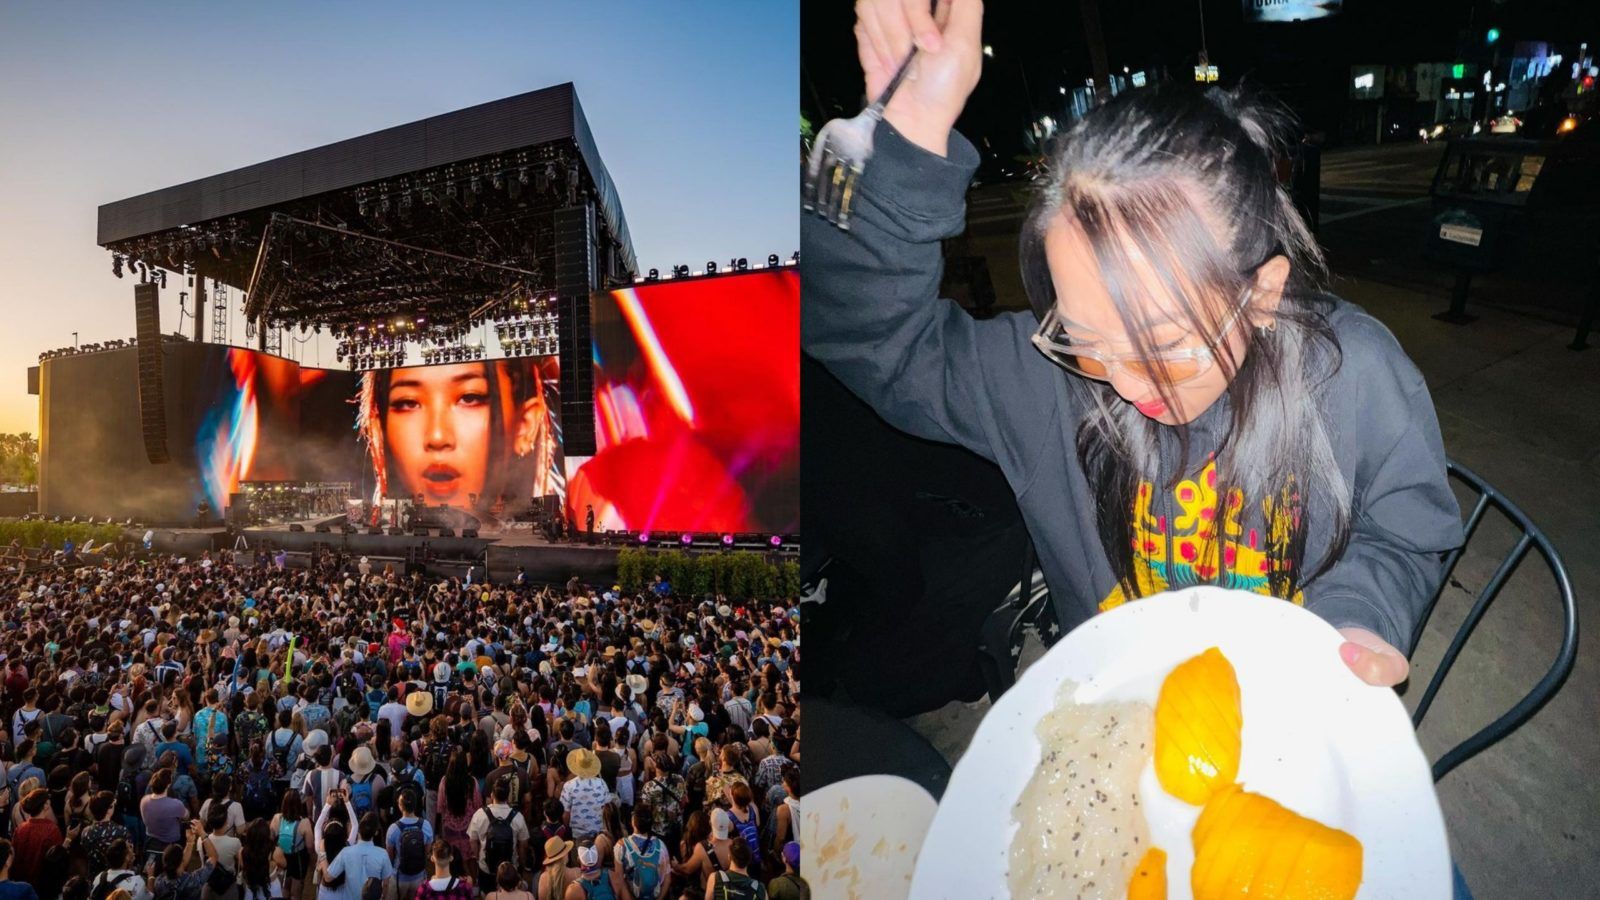 Milli’s Coachella performance leads to an increased love for mango sticky rice